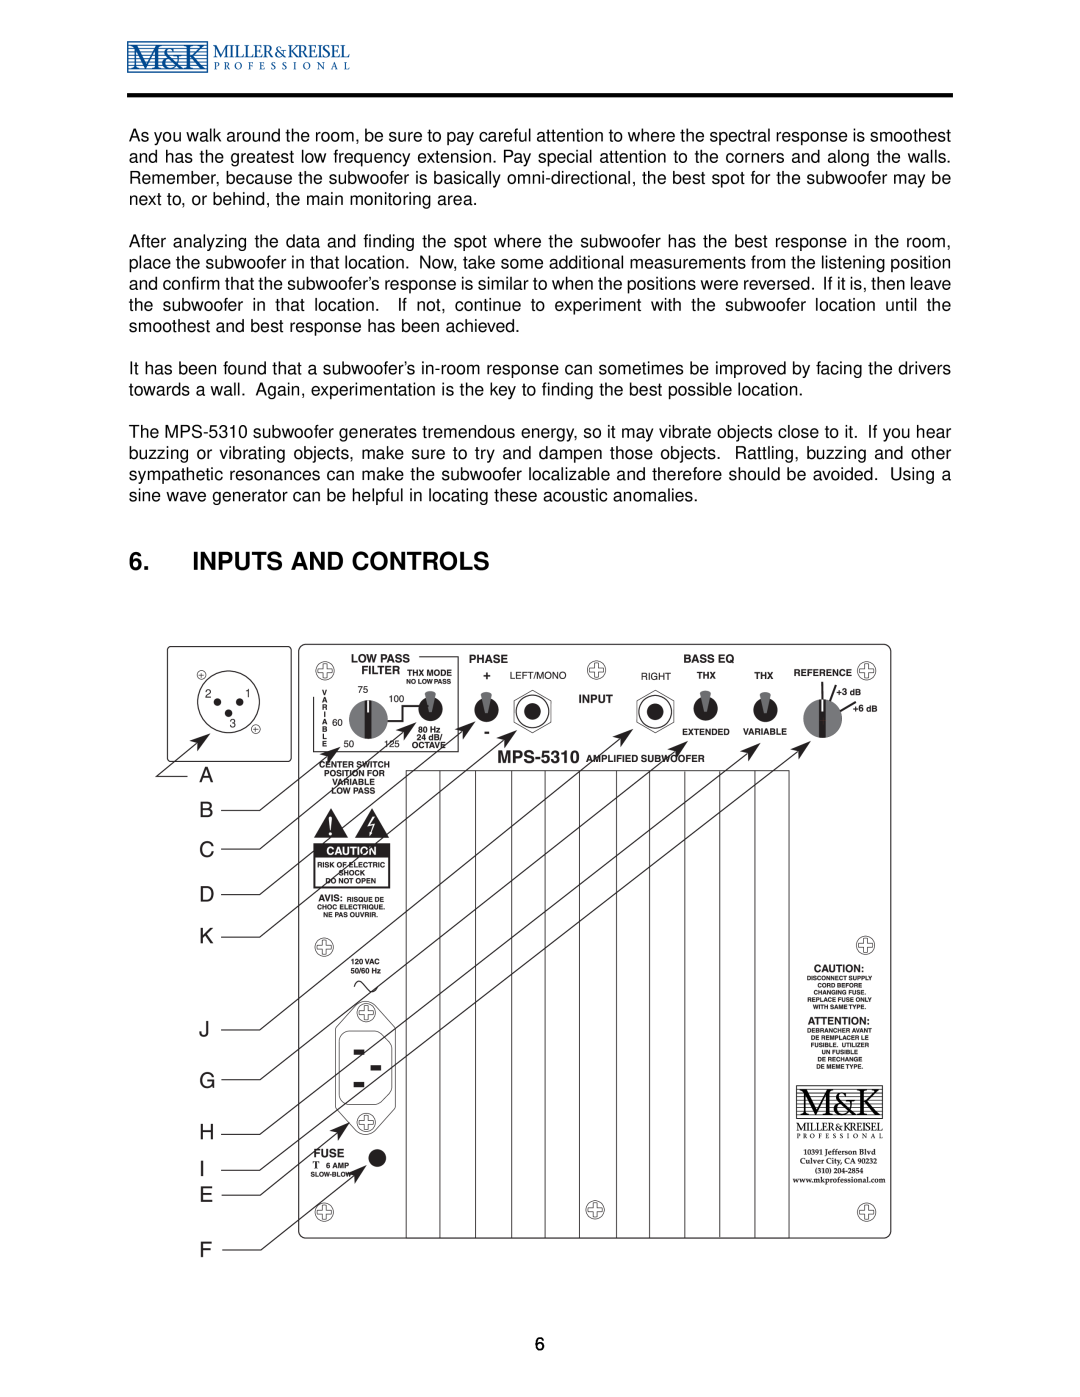 MK Sound MPS-5310, MPS-5410 operation manual Inputs And Controls 